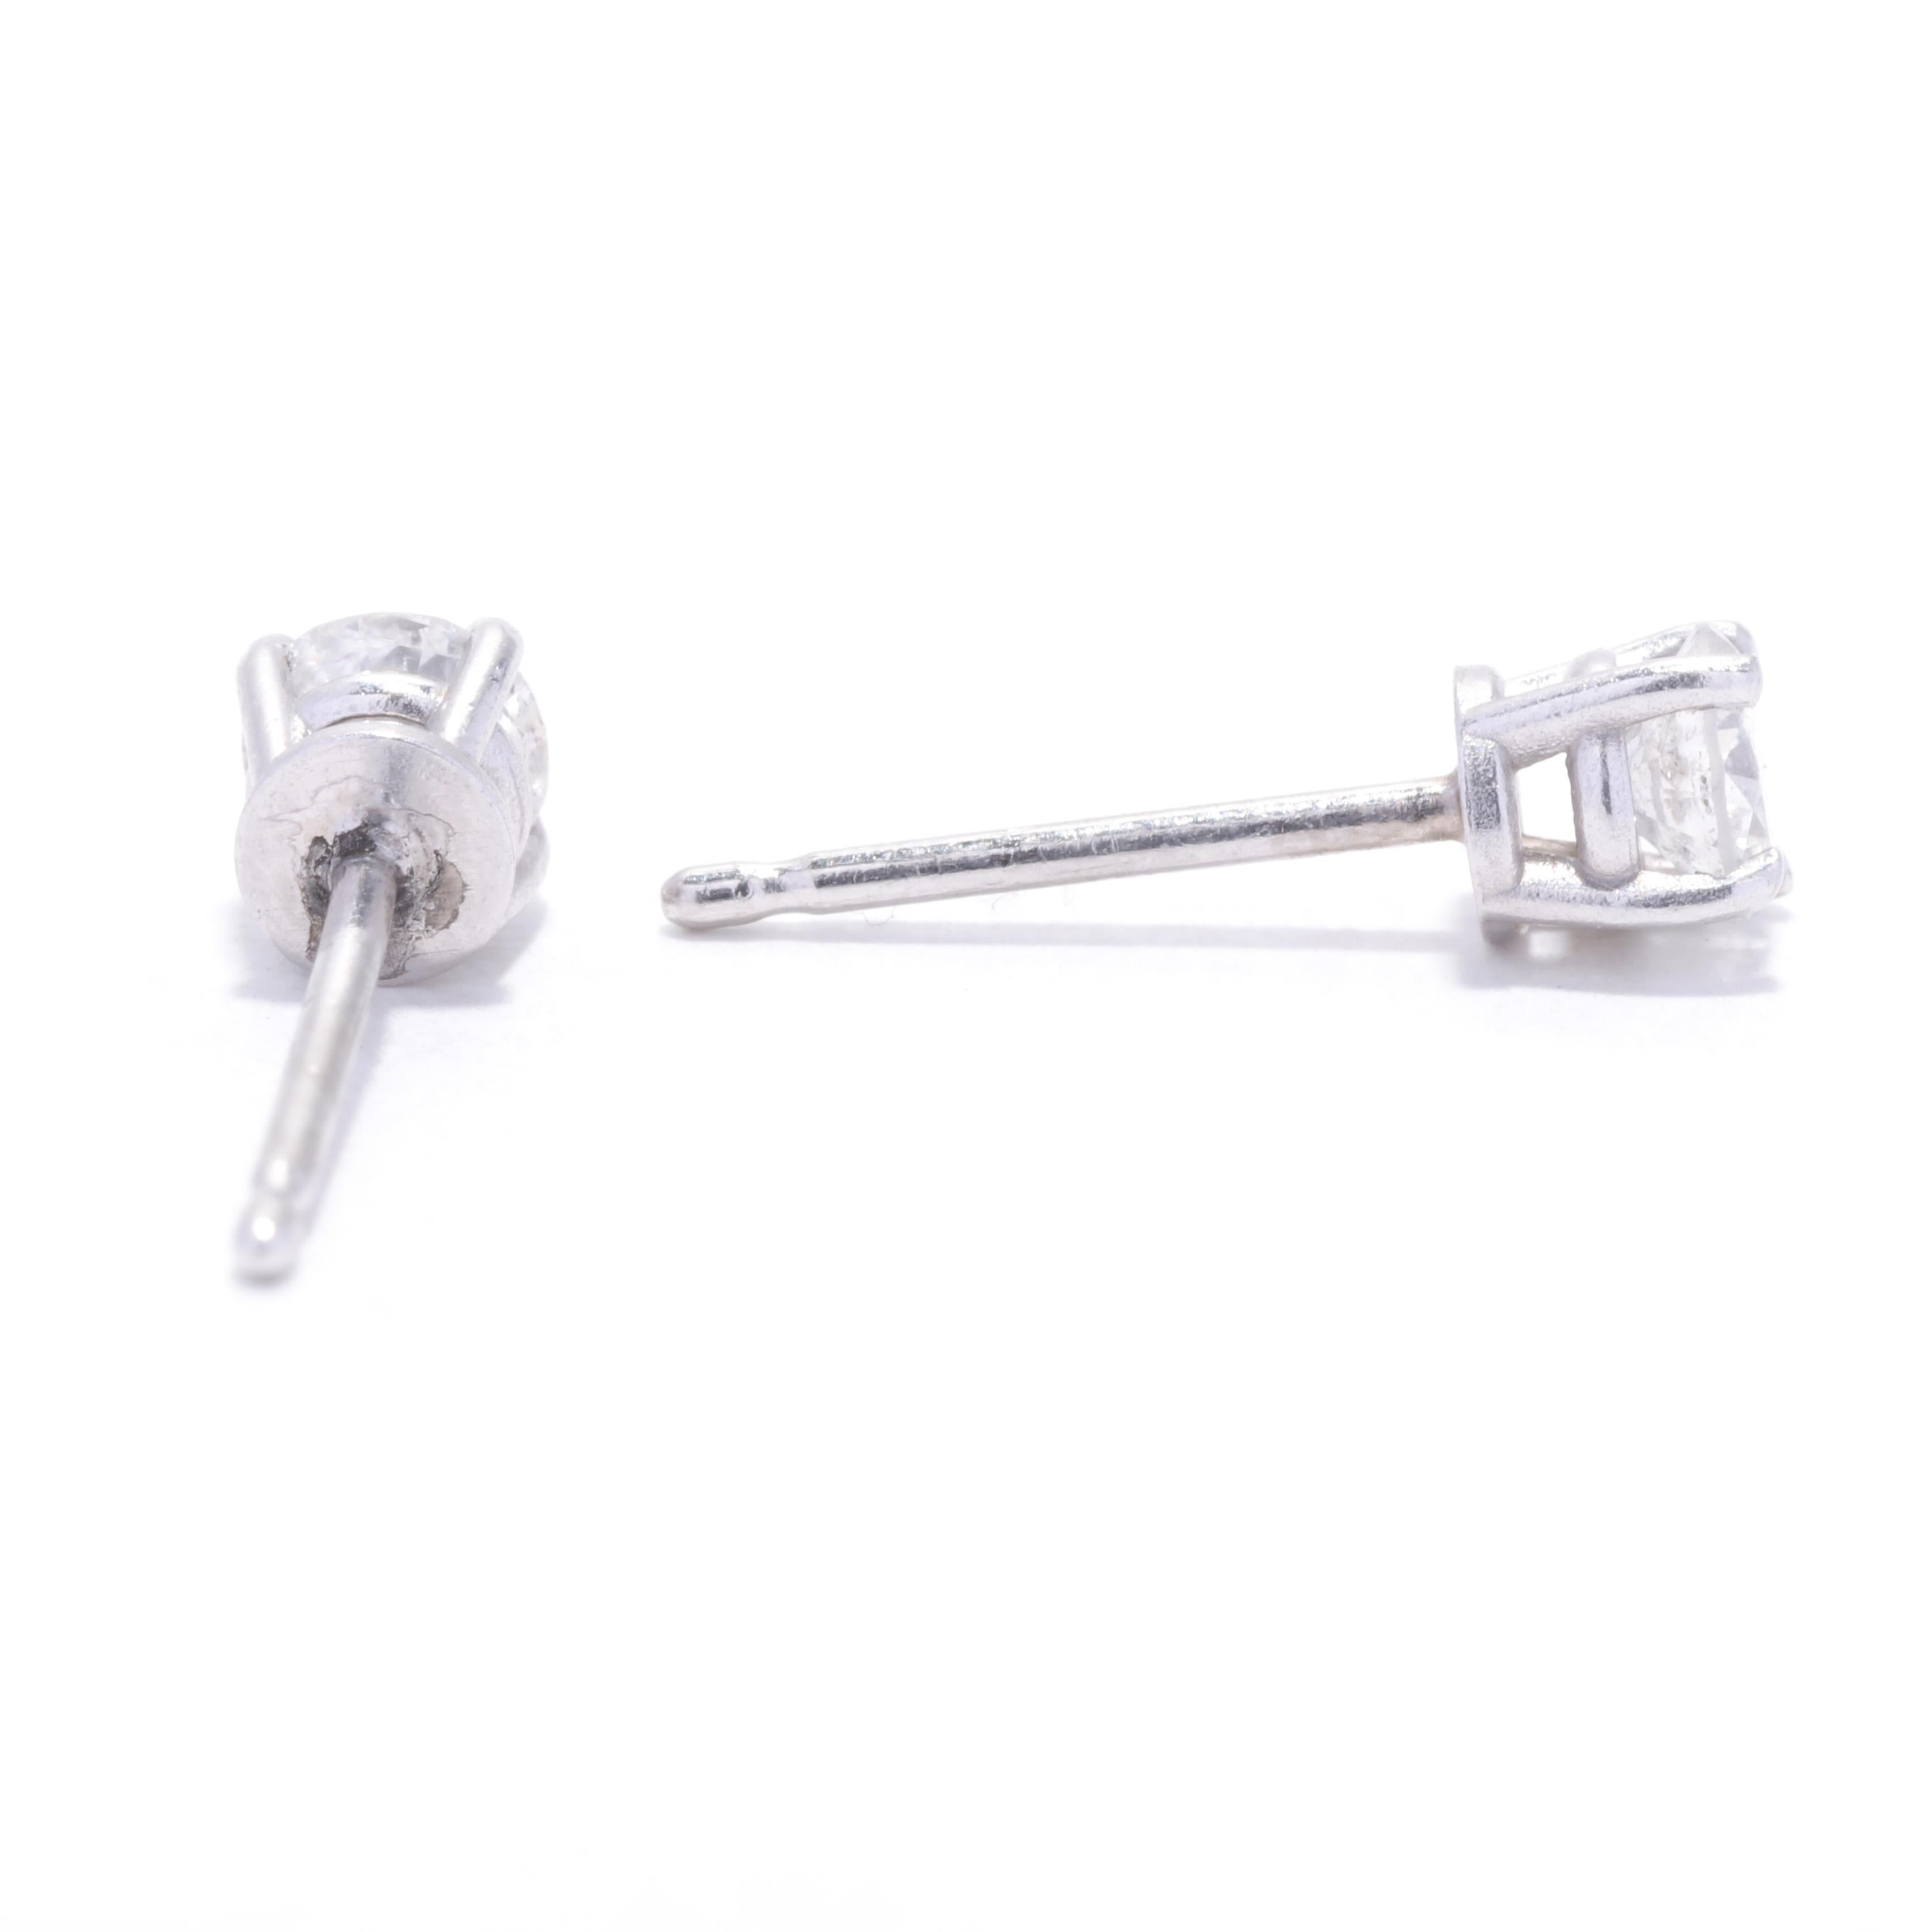 A pair of 14 karat white gold diamond stud earrings. This simple stud earrings feature prong set, round brilliant cut diamonds weighing approximately .33 total carats with pierced push backs.

Stones: 
- diamonds, 2 stones
- round brilliant cut
-